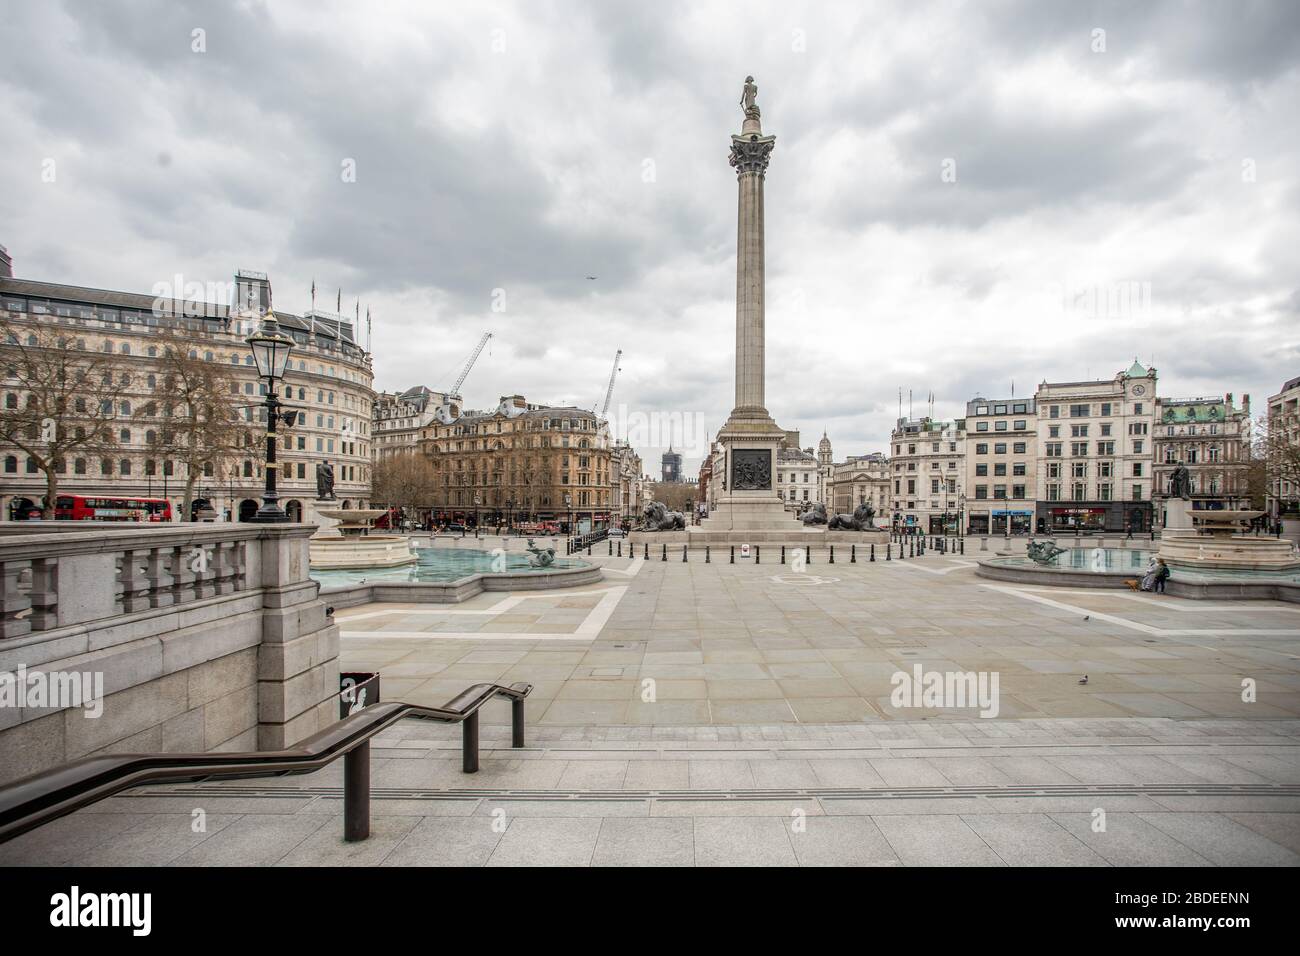 Empty streets during Lockdown around Trafalgar Square Central London, UK at the height of the Corona Virus Pandemic Stock Photo